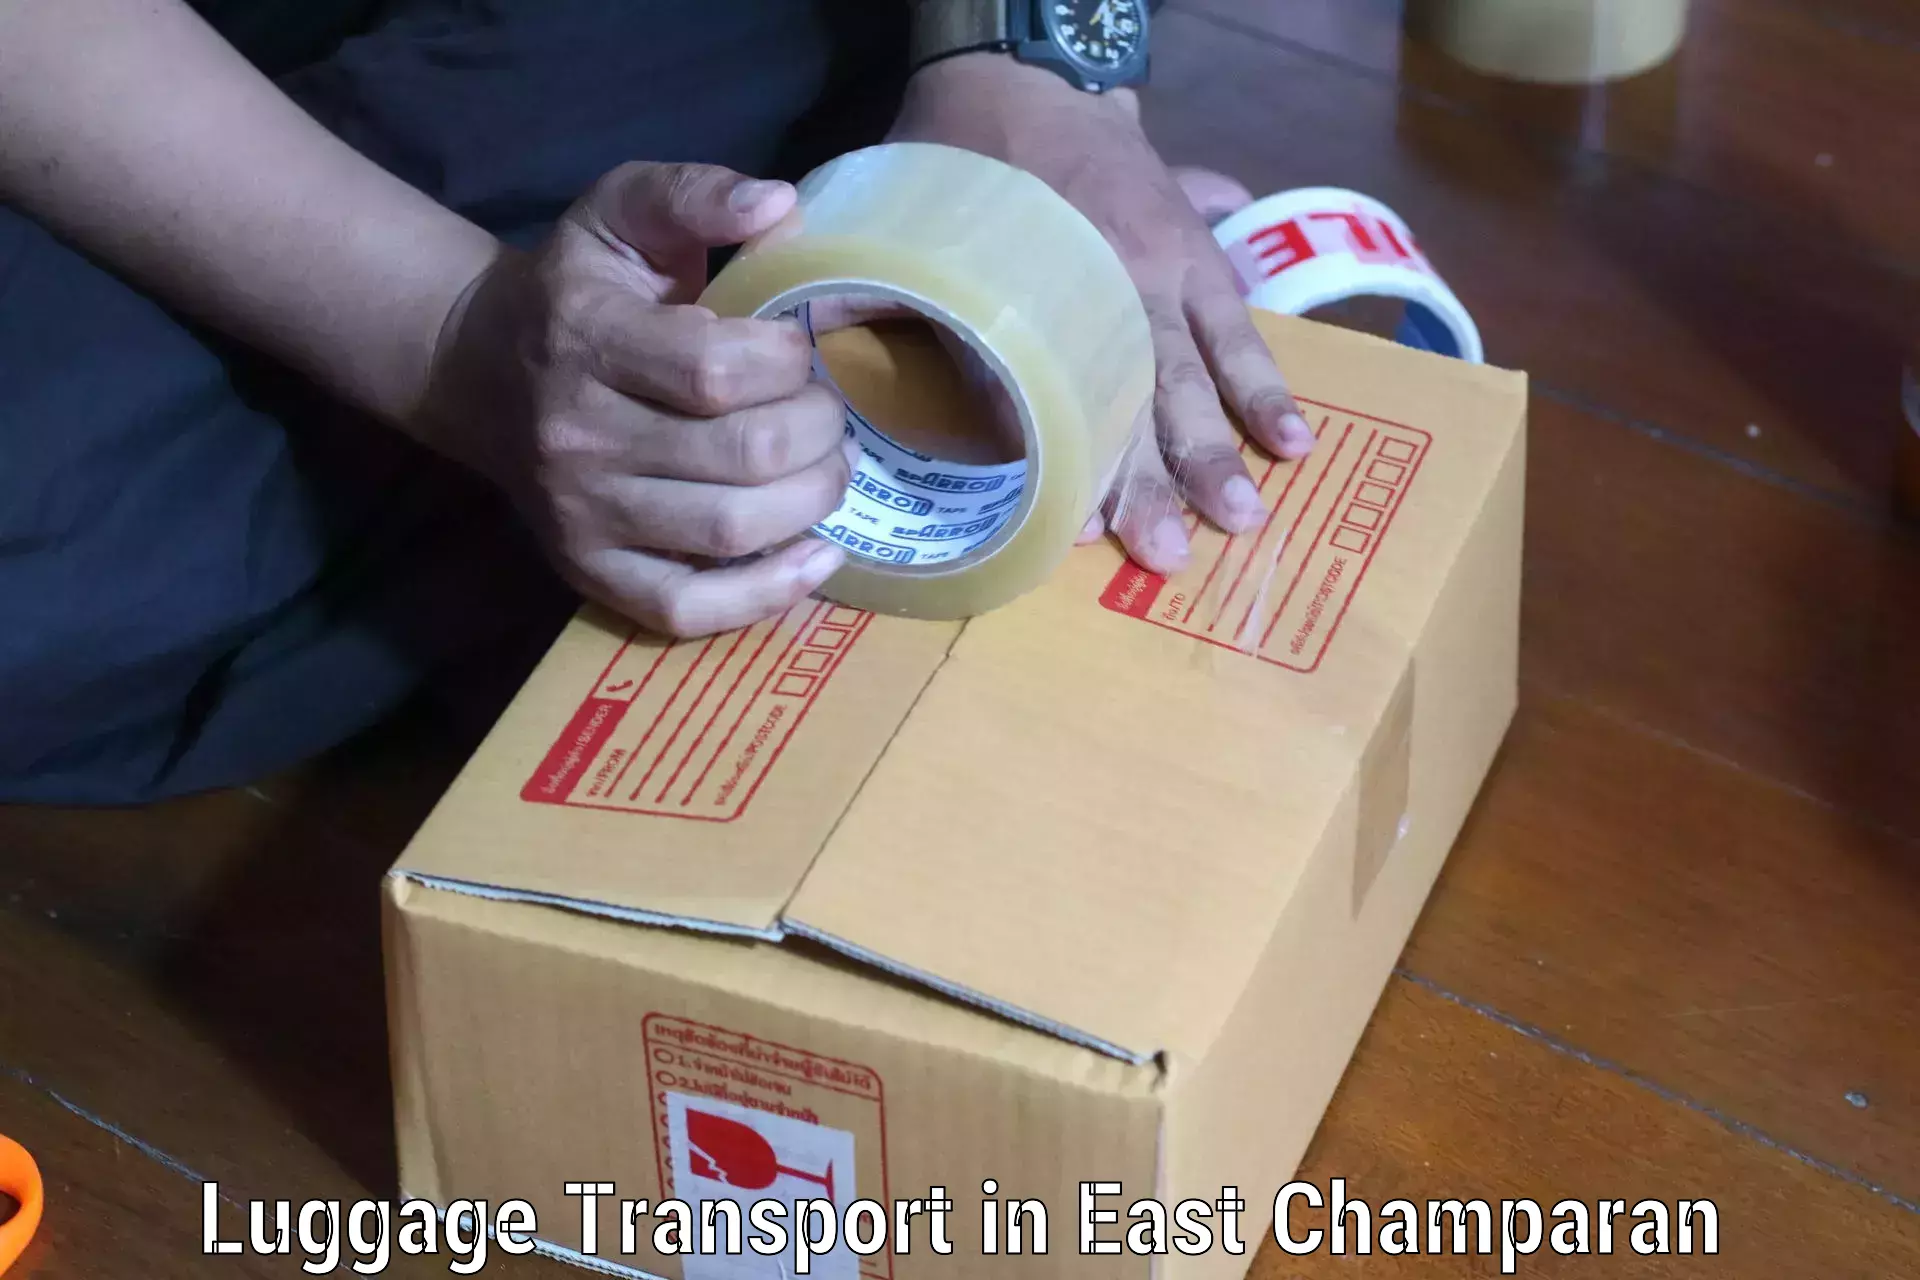 Luggage delivery news in East Champaran